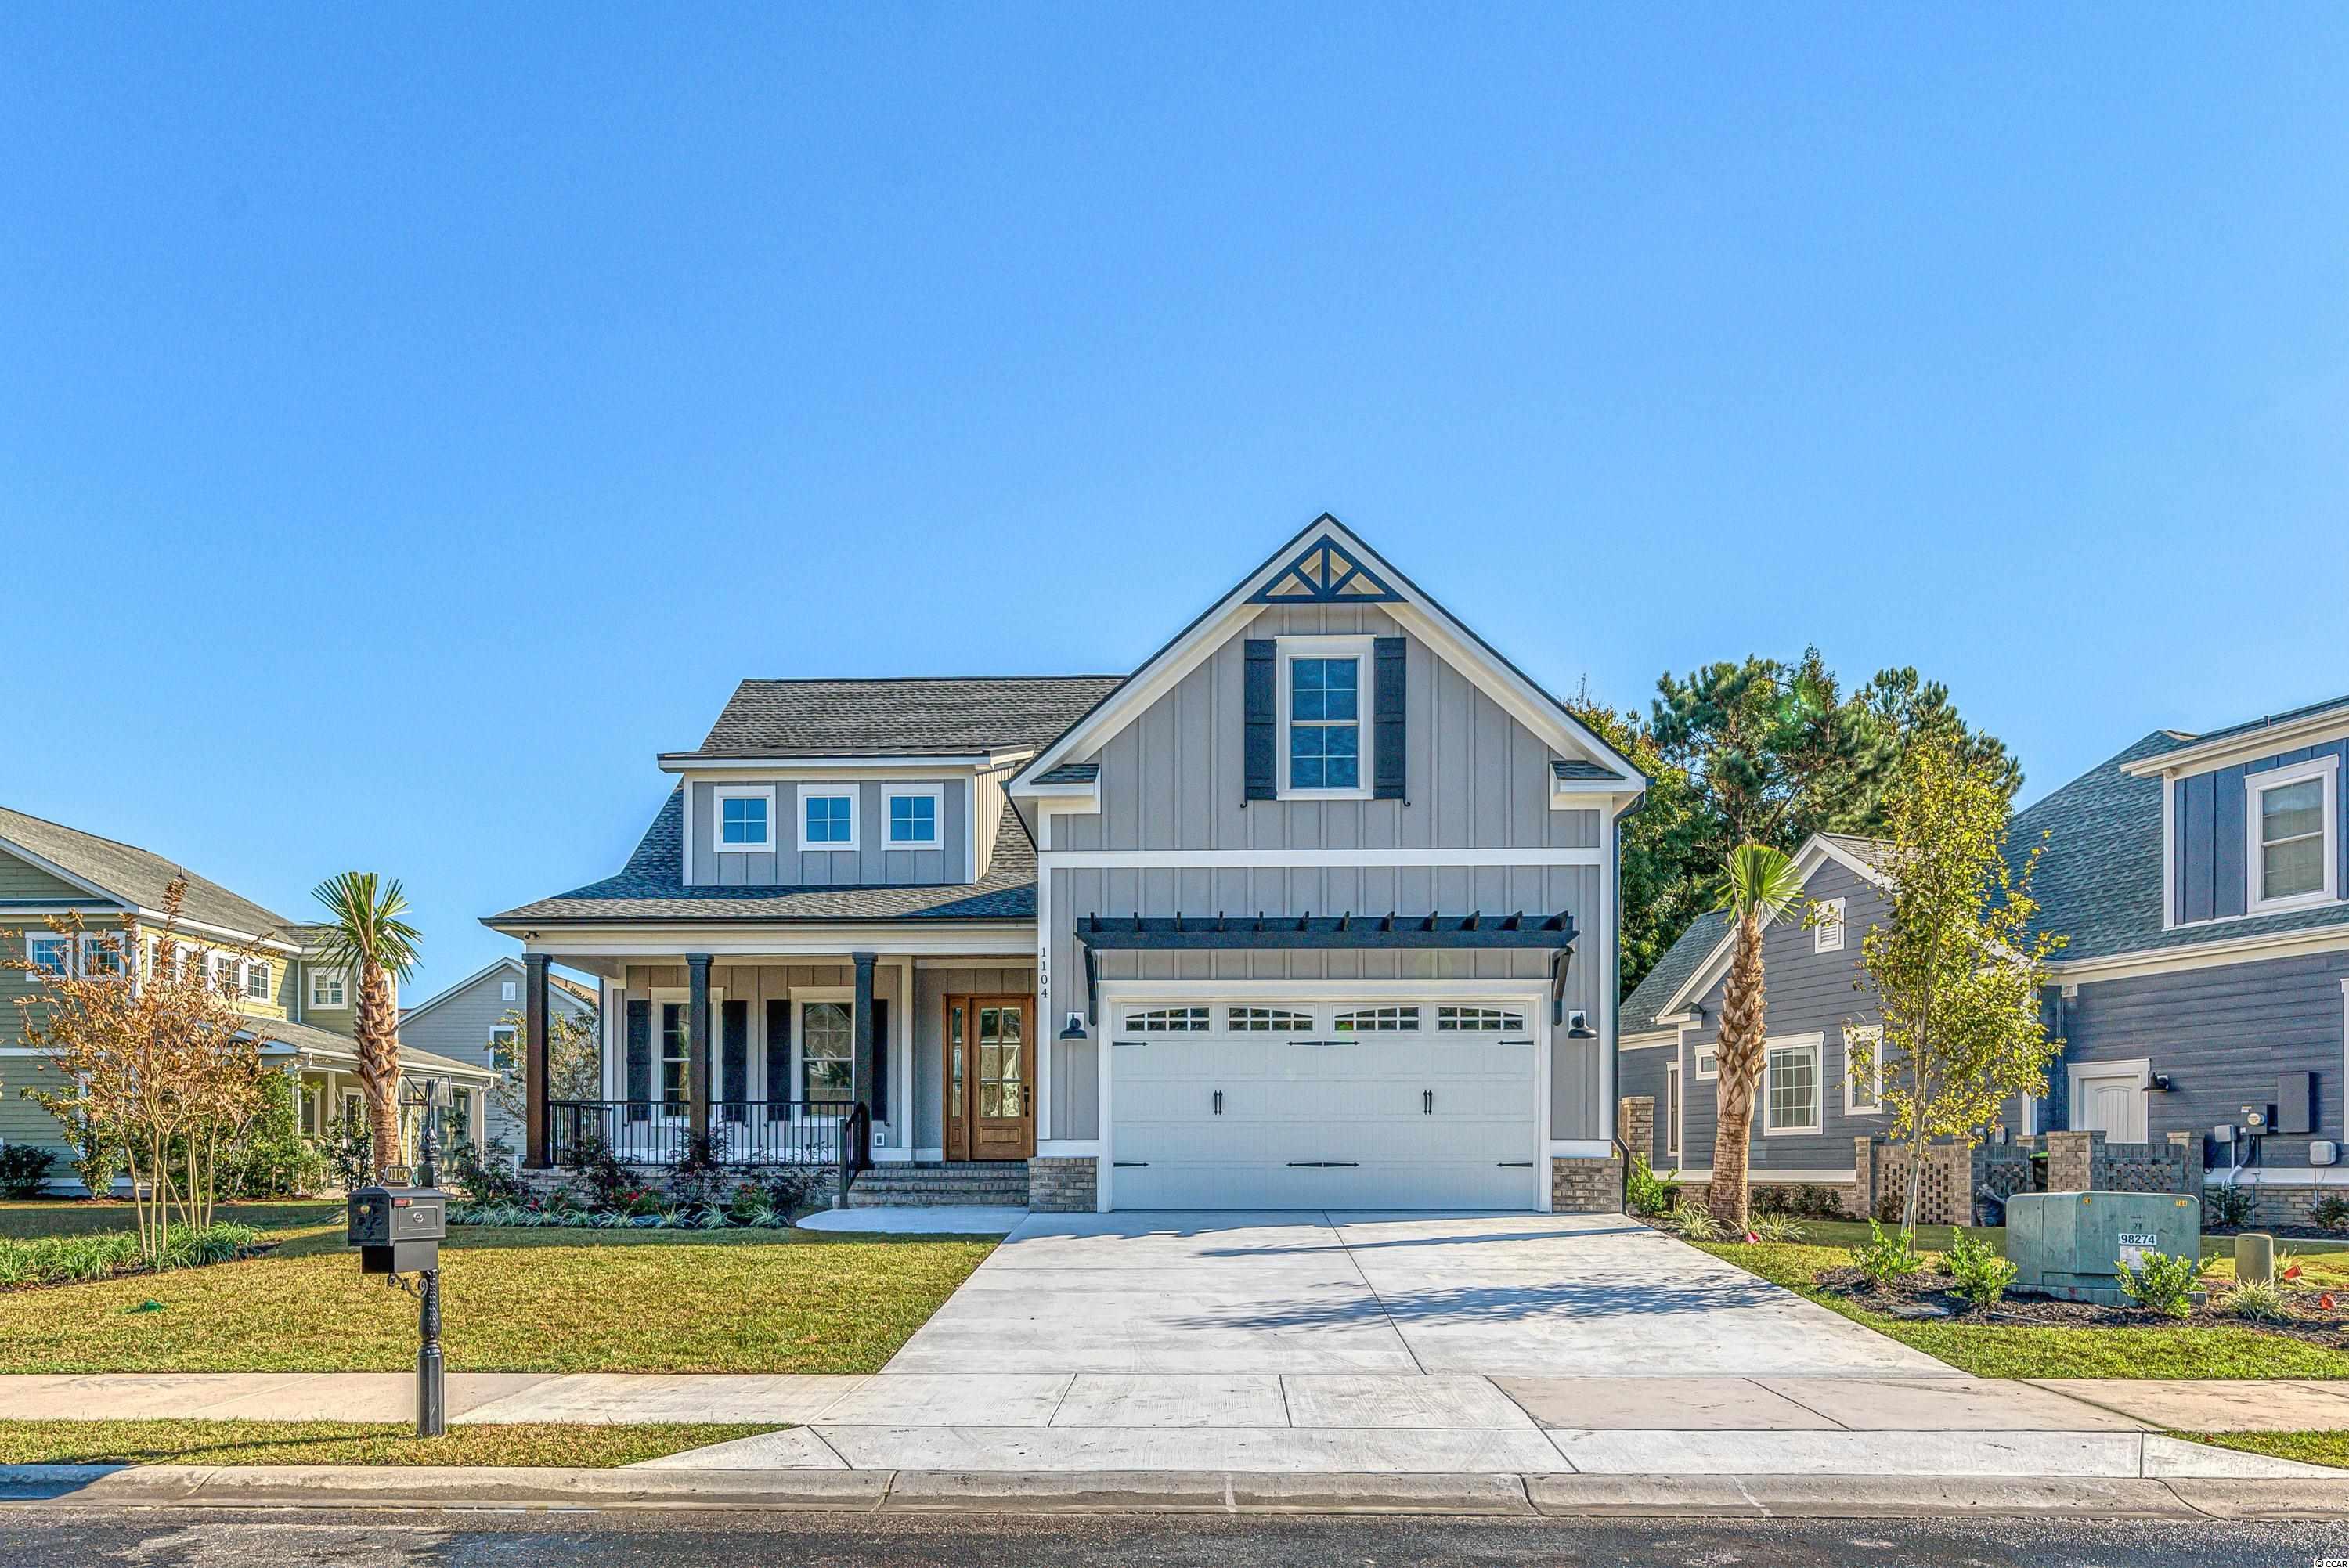 1104 East Isle of Palms Ave. Myrtle Beach, SC 29579